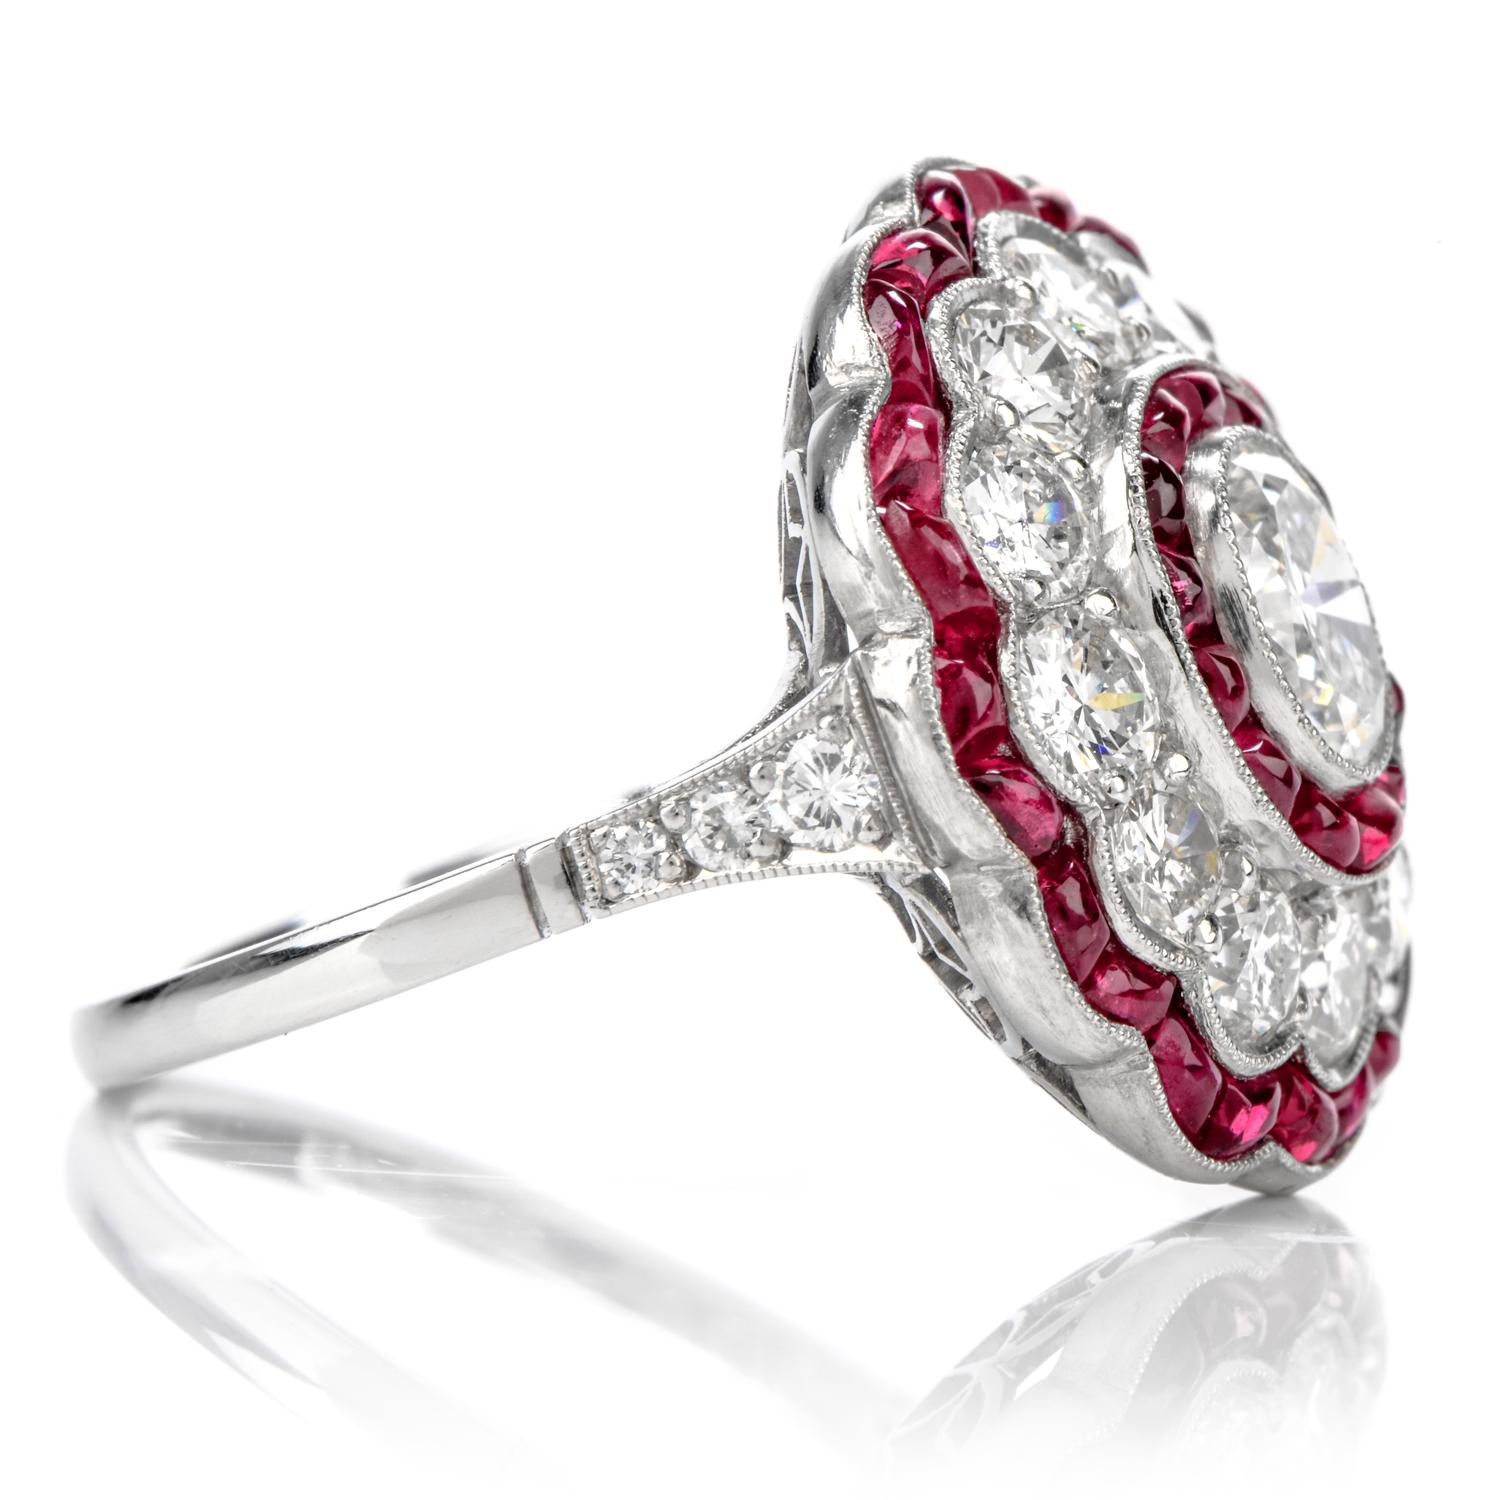 This 1950'S art deco style Cocktail ring was inspired in a Halo motif

and crafted in Platinum.Adorning the center is an oval cut Diamond weighing appx. 0.60 carat and is G-H color and VS2-SI1 clarity.  Layers of cabachon cut baguette Rubies and